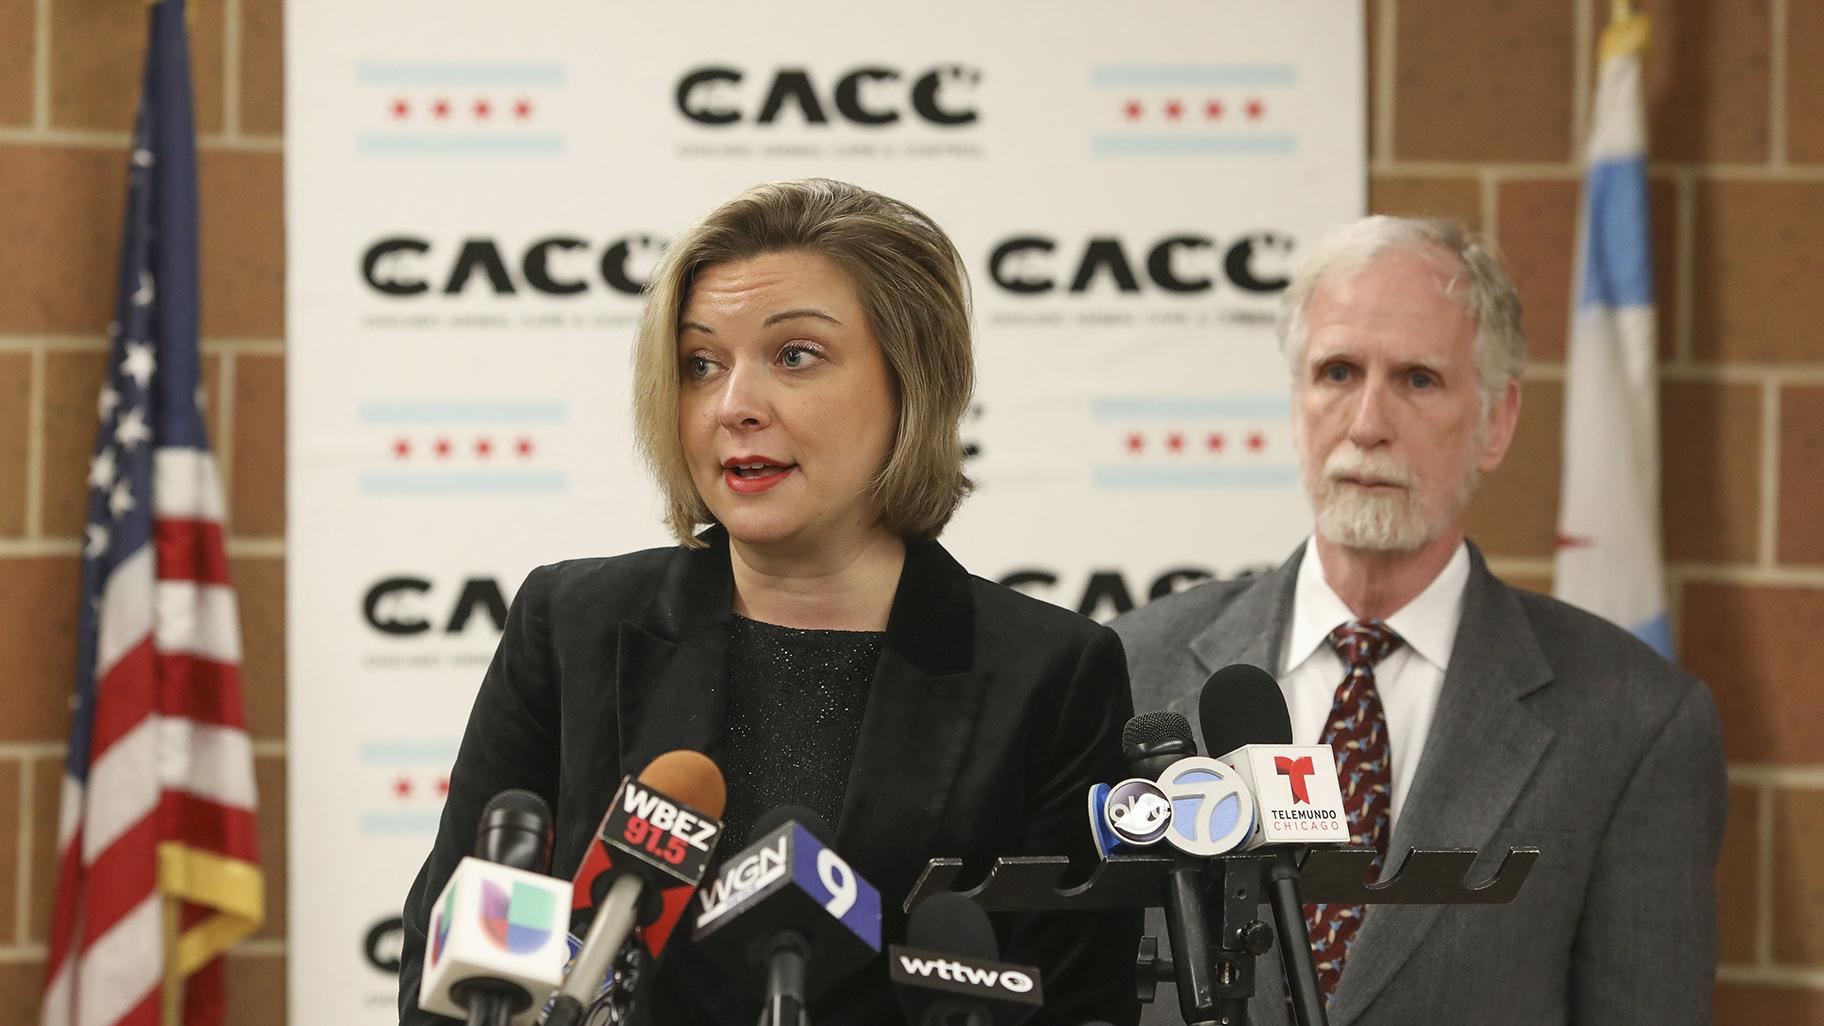 Kelley Gandurski, executive director of Chicago Animal Care and Control, speaks with reporters in Chicago, Thursday, Jan. 9, 2020, while Dr. Tom Wake, the interim administrator of Cook County Animal and Rabies Control, stands behind her. (AP Photo / Teresa Crawford)